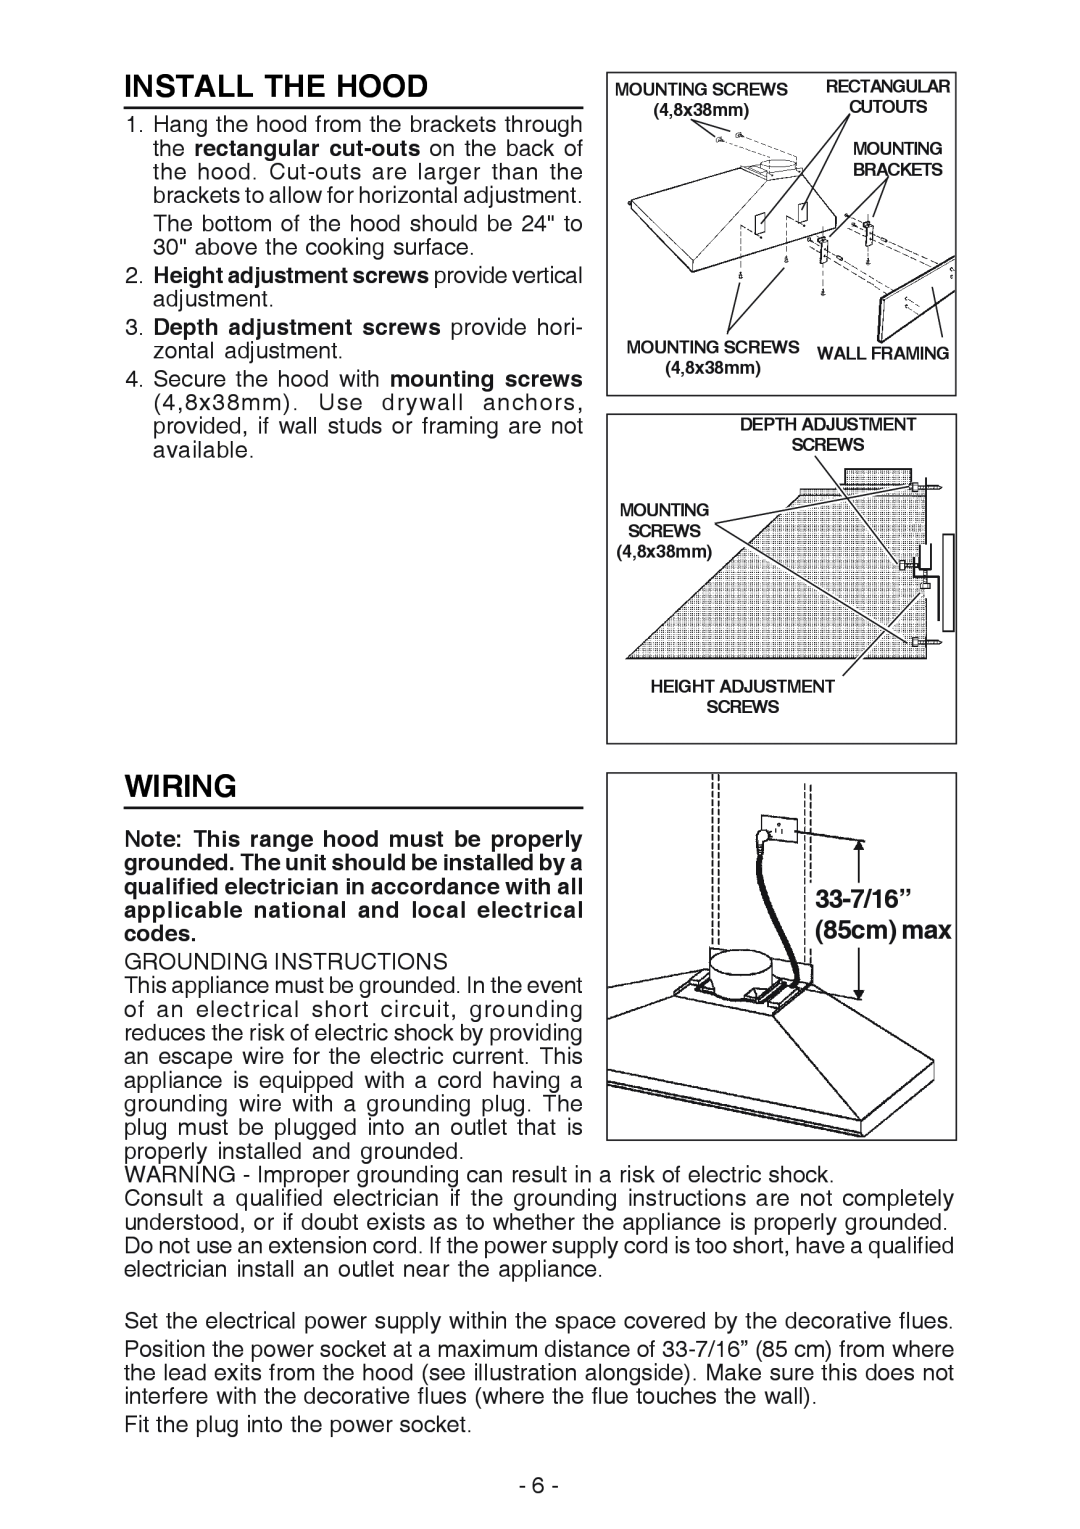 Broan 619004EX manual Install The Hood, Wiring, 33-7/16”, 85cm max, Note This range hood must be properly, codes 